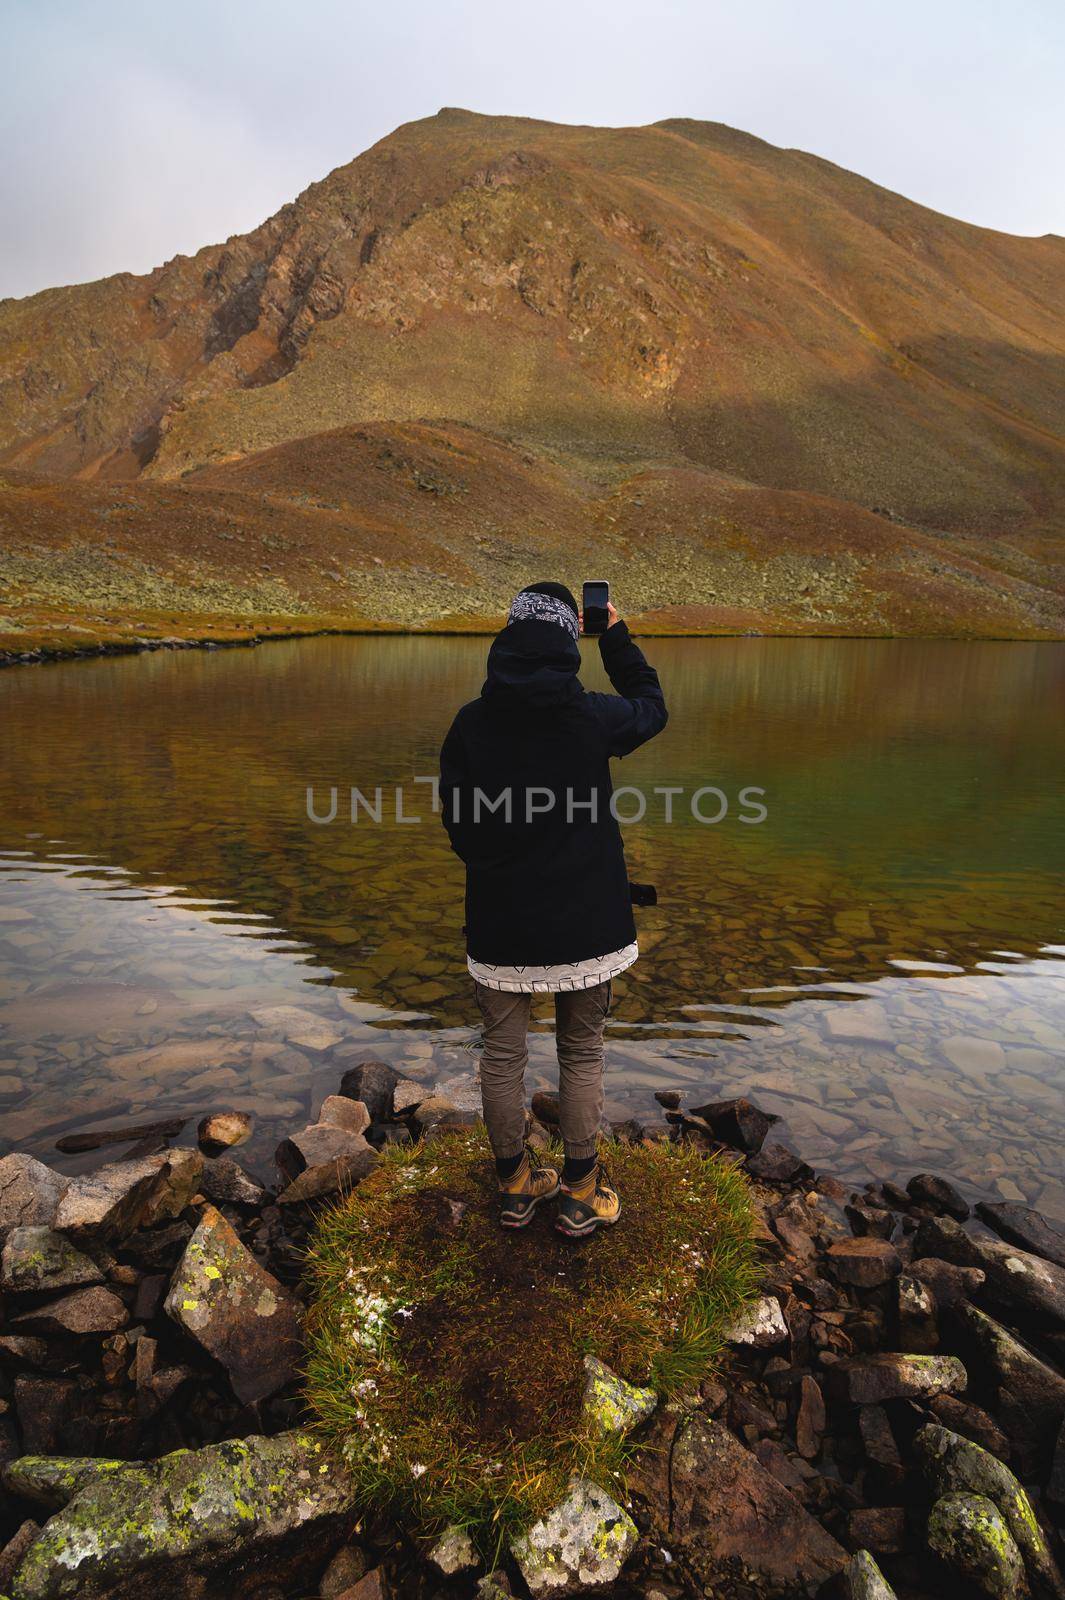 Travel photographer taking pictures of nature on a smartphone, mountain landscape by the lake. Tourist on adventure vacation by yanik88